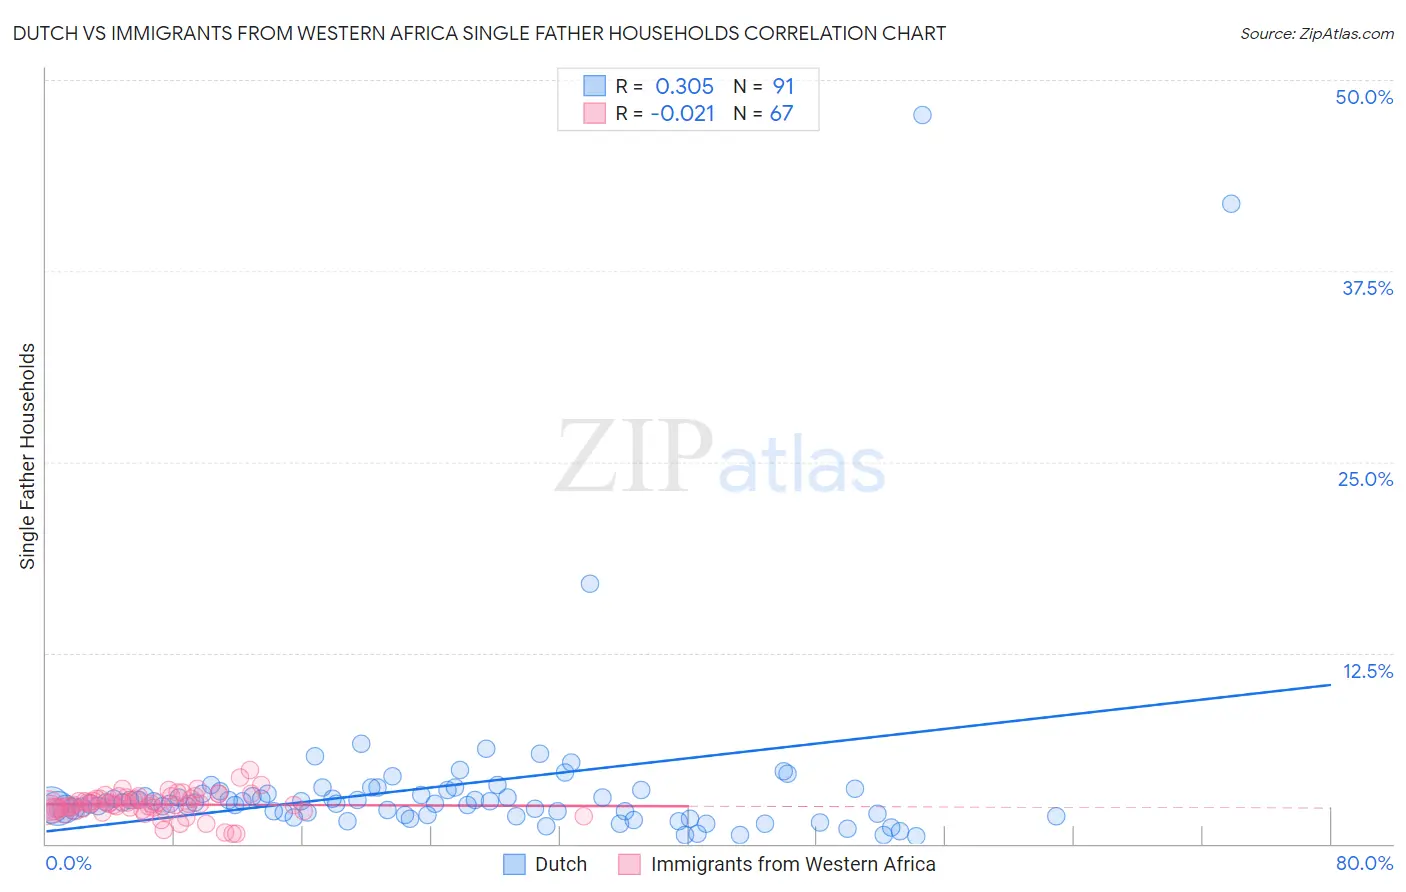 Dutch vs Immigrants from Western Africa Single Father Households